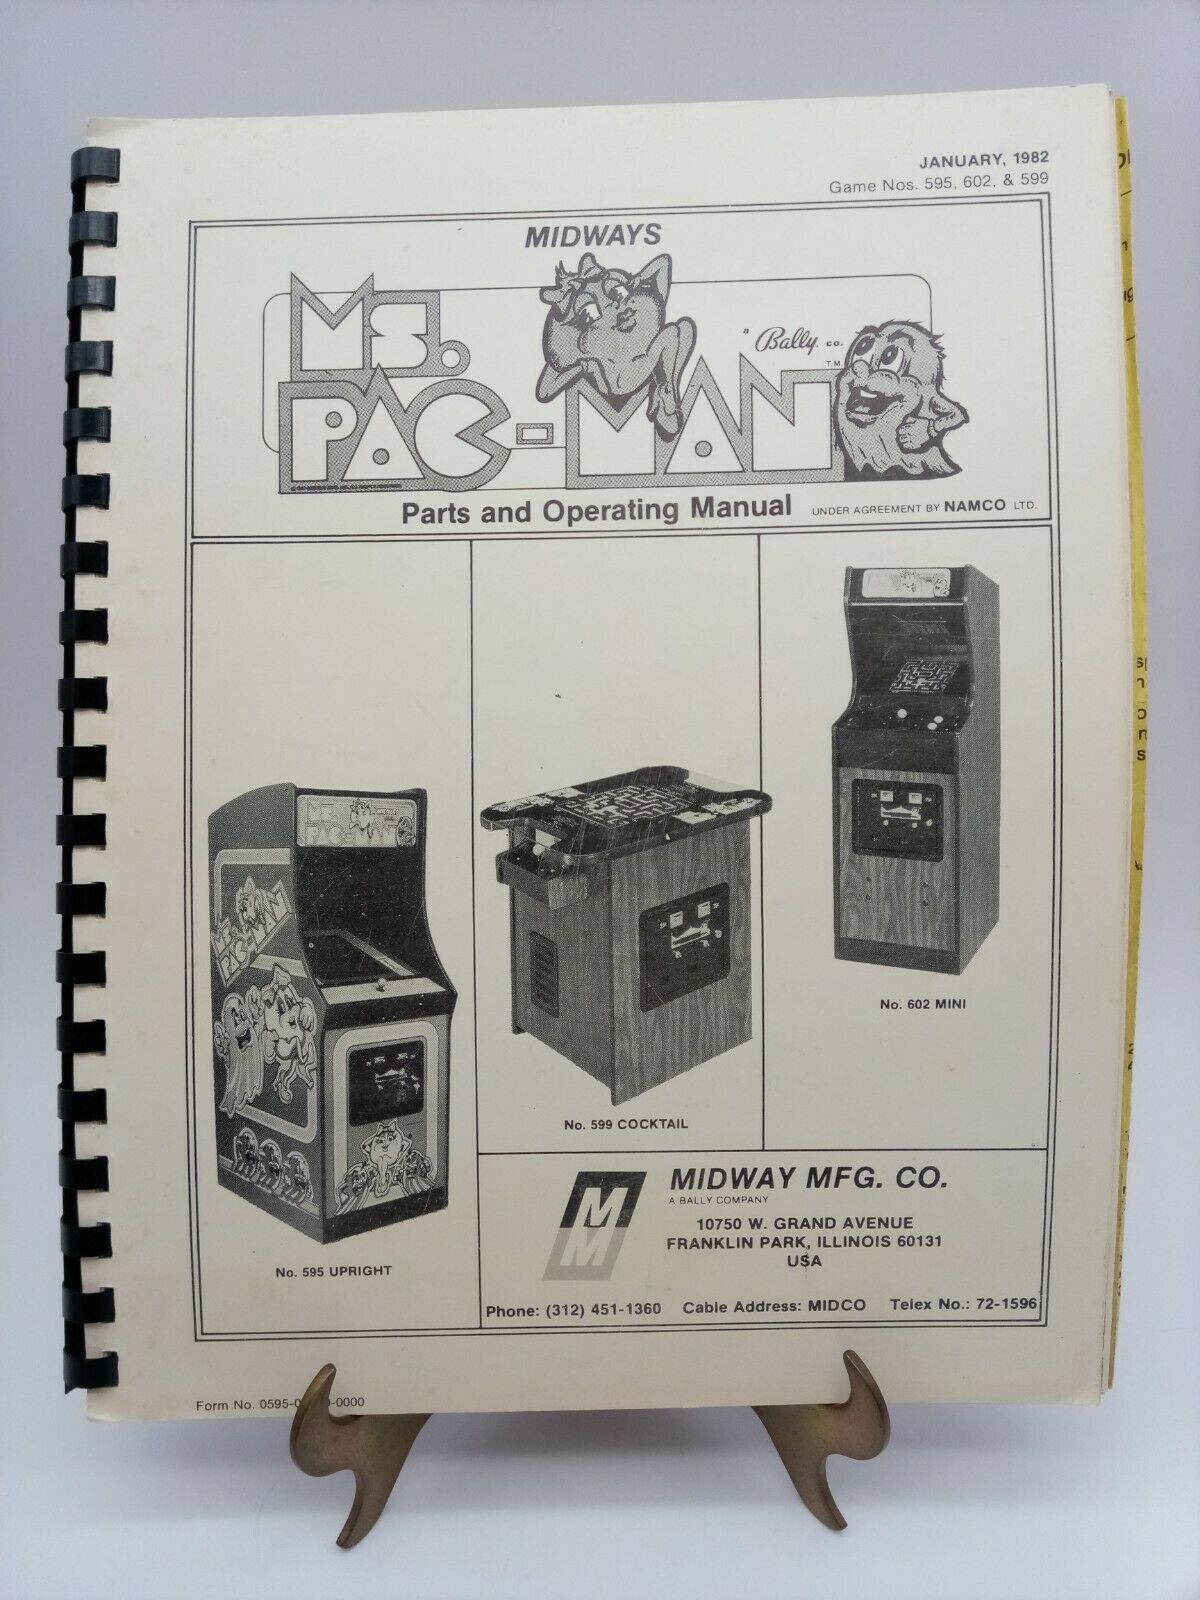 Vintage Ms Pac Man Parts & Operating Manual Midway Mfg Co Games 595, 602, 599